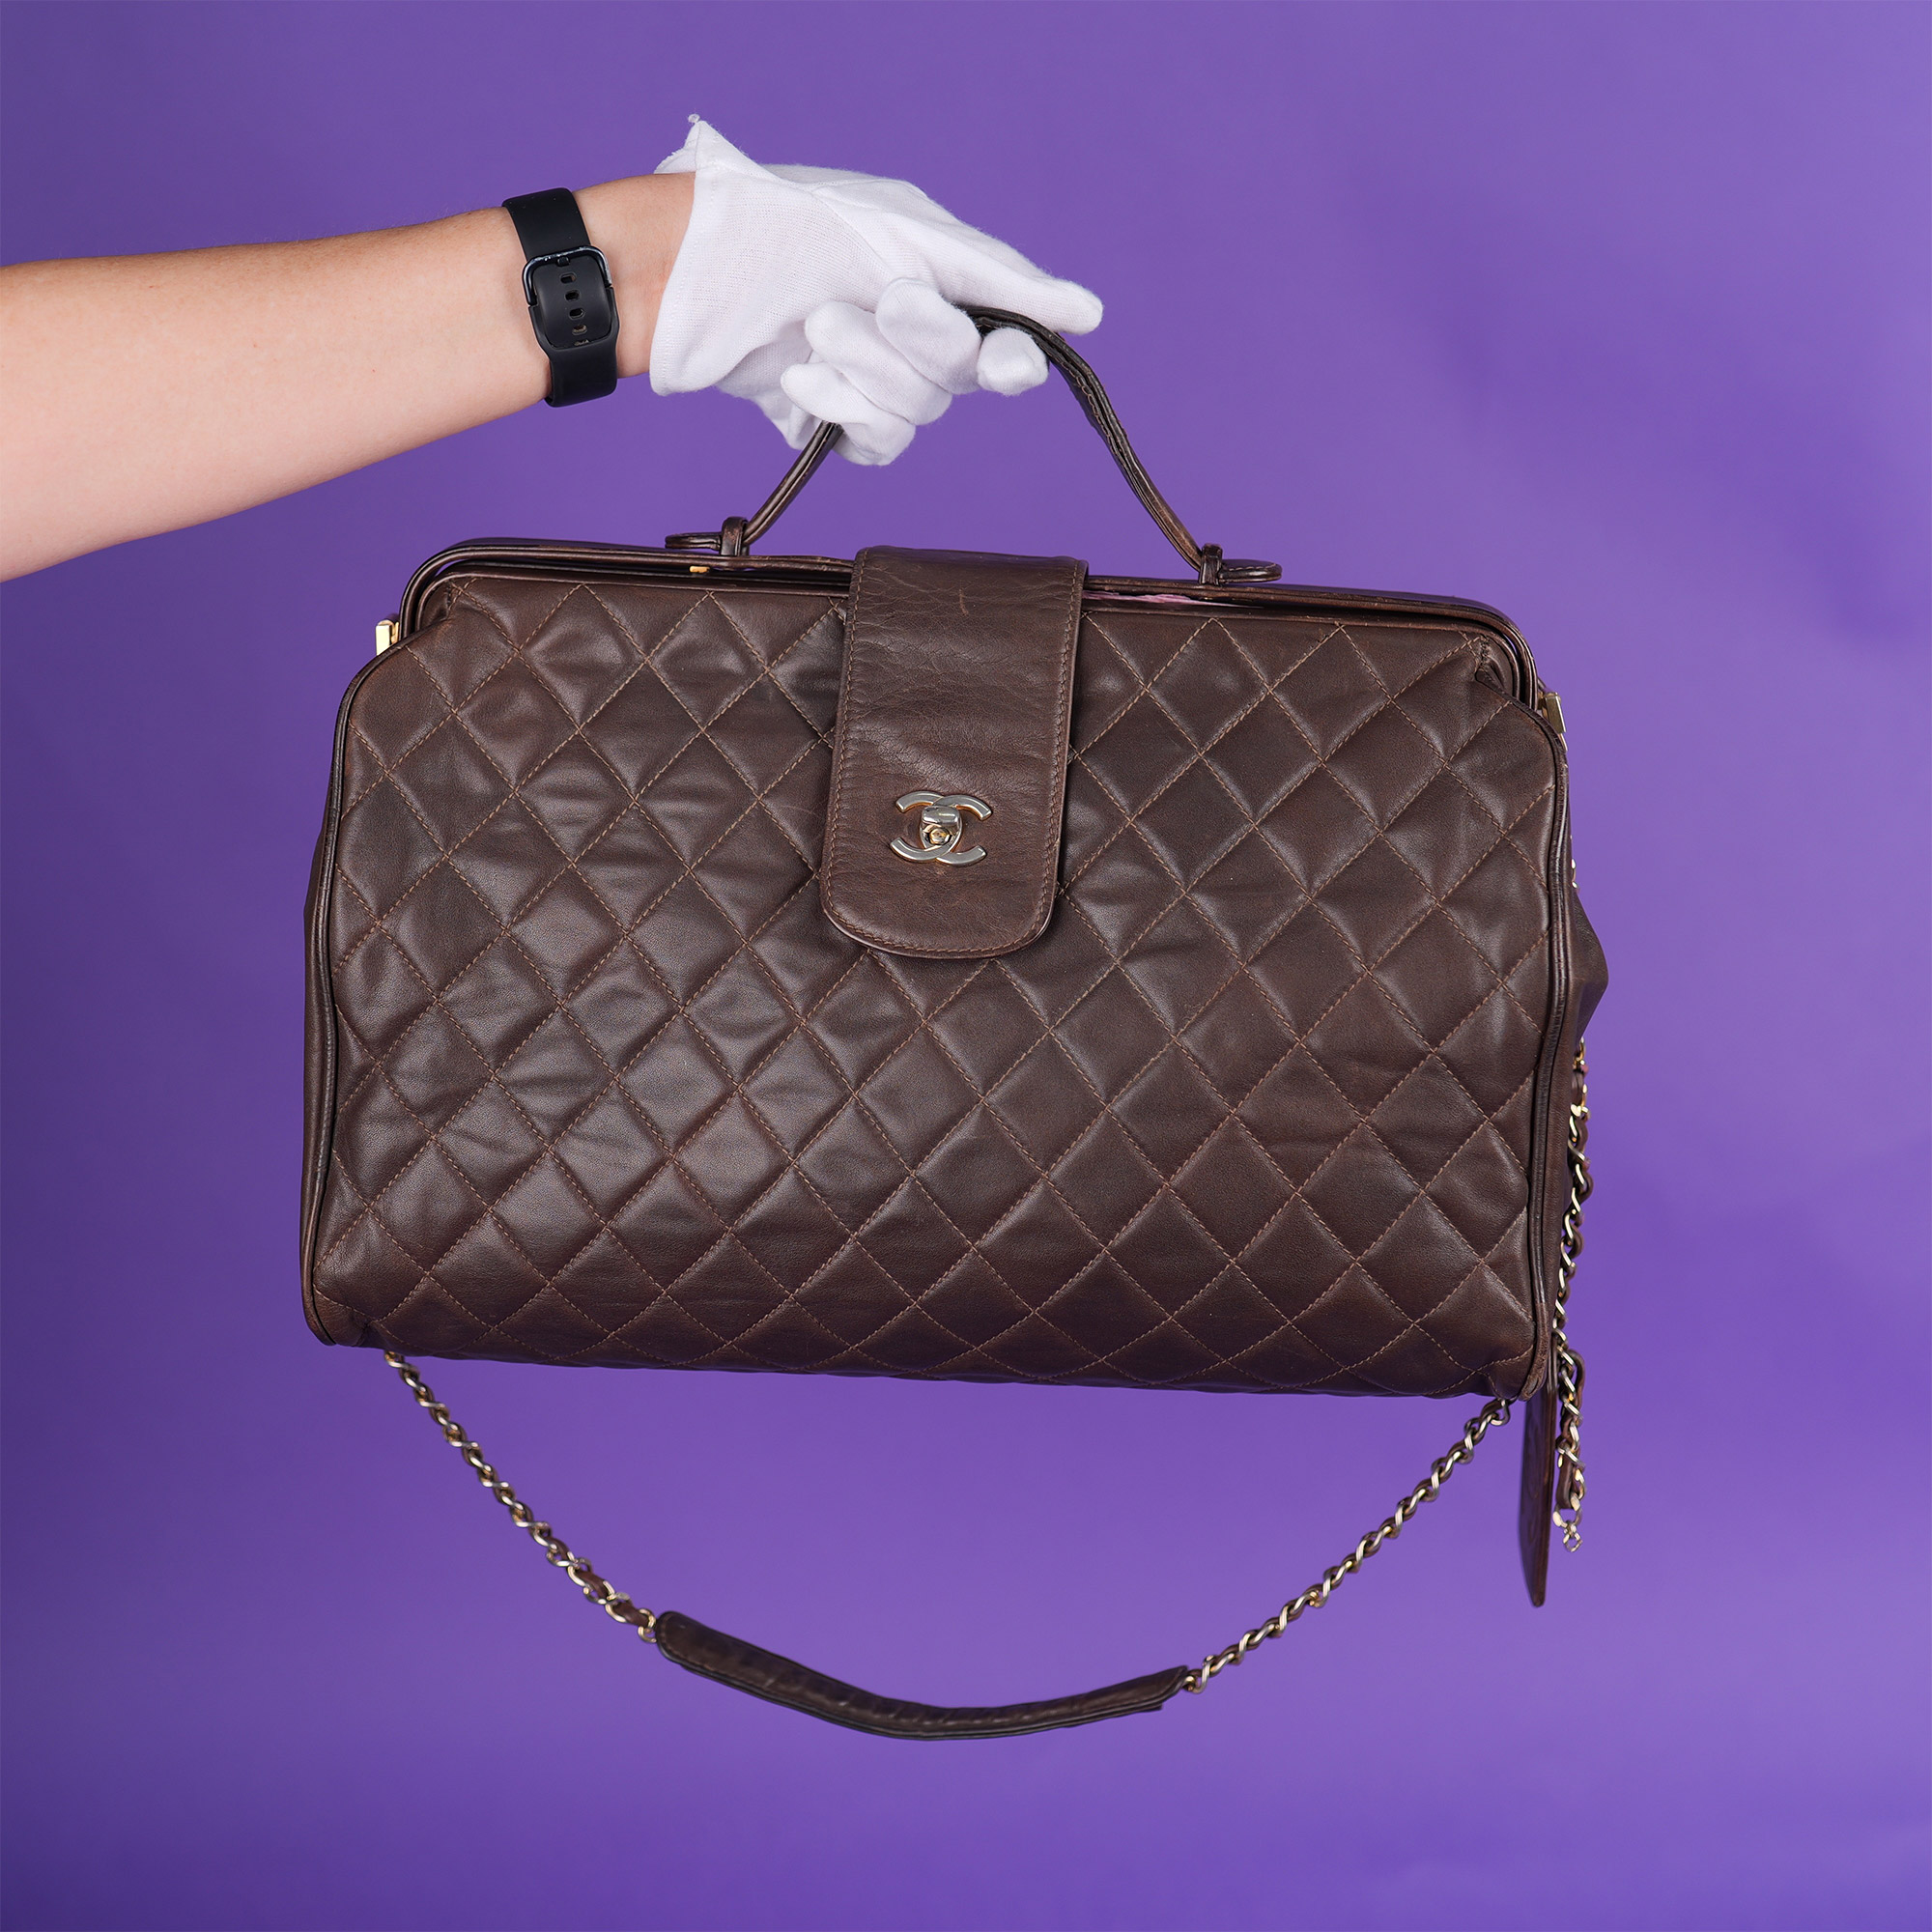 Authentic Chanel Brown Quilted Leather Large Doctor Bag - Image 5 of 13